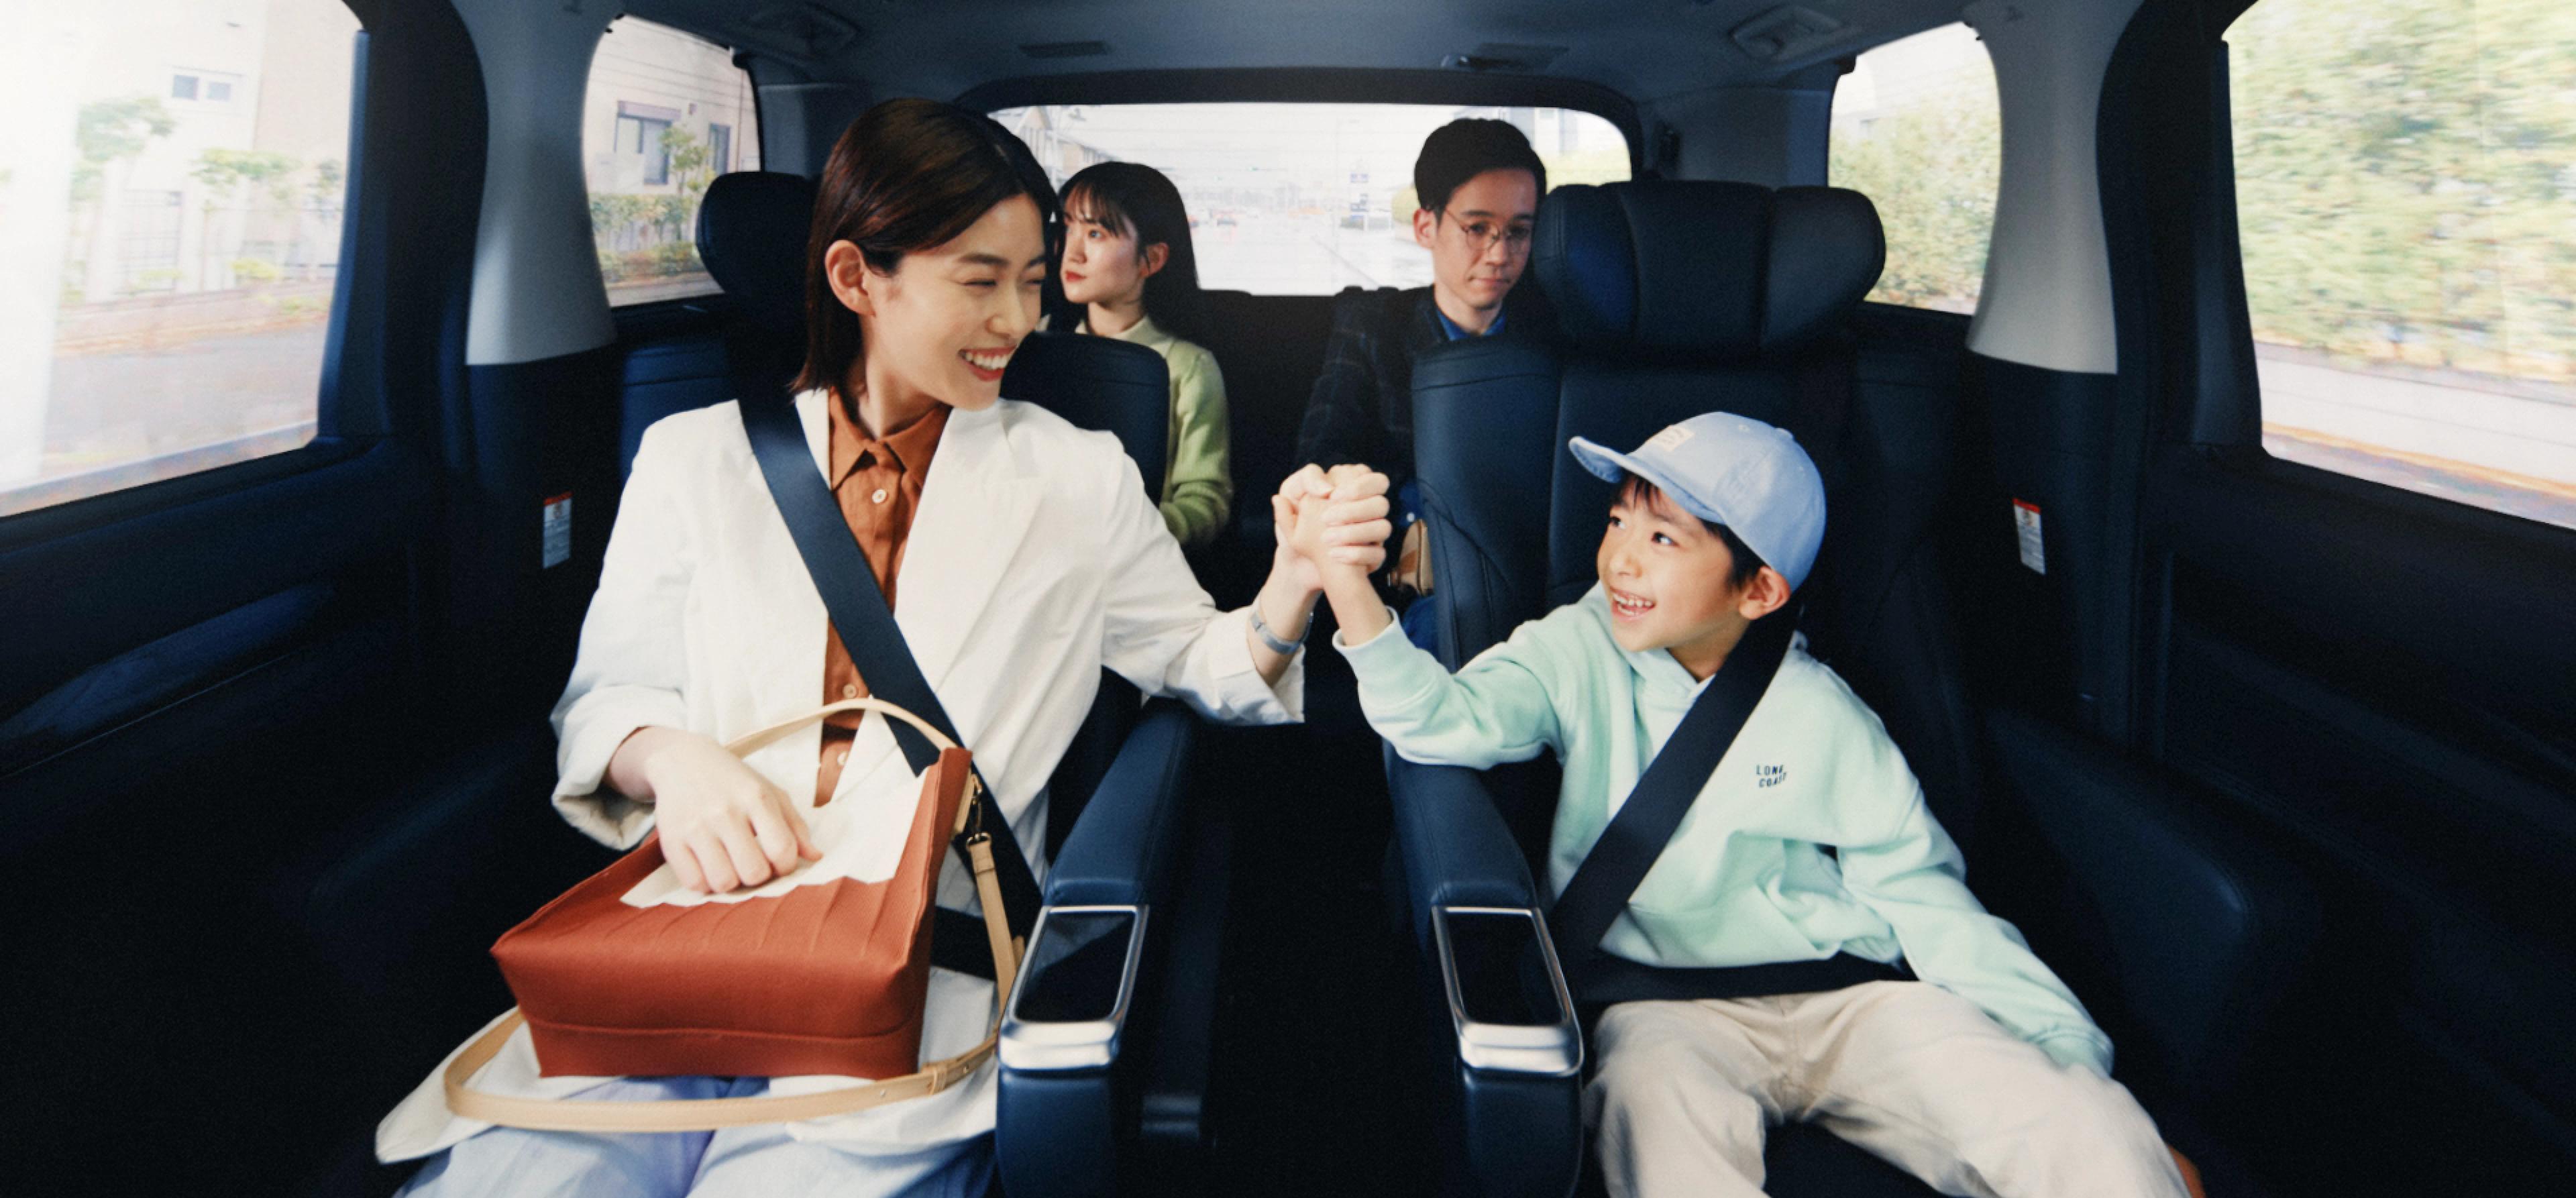 A woman, a child, and two other groups are sharing the ride.